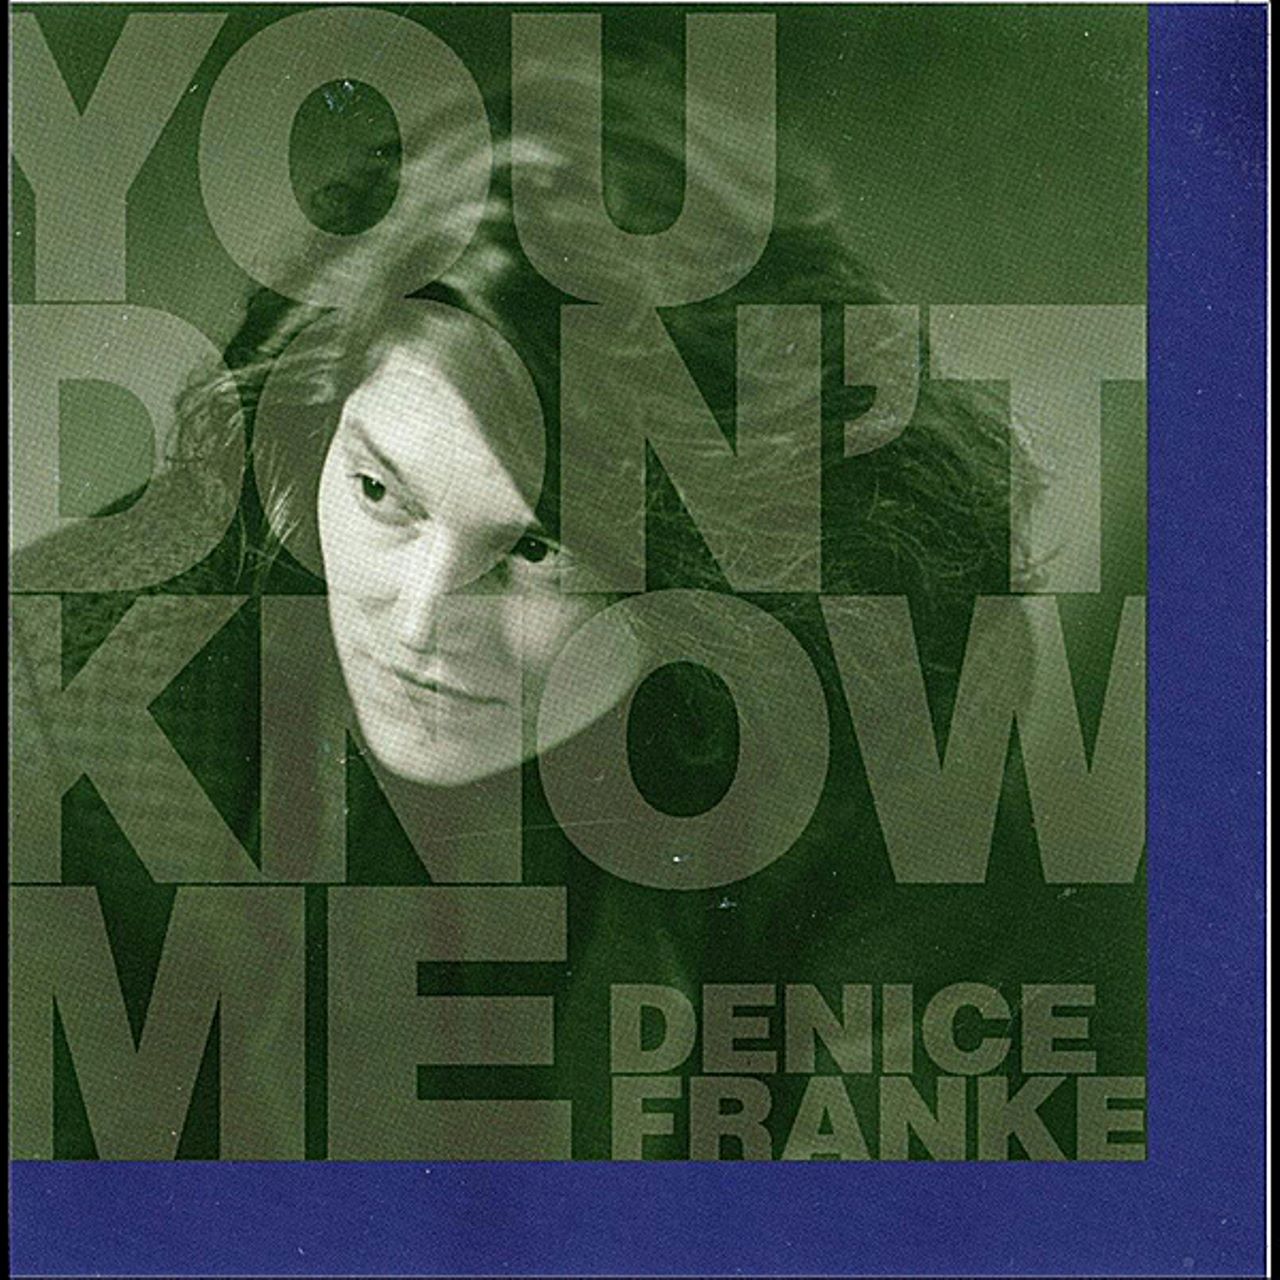 Denice Franke - You Don't Know Me cover album